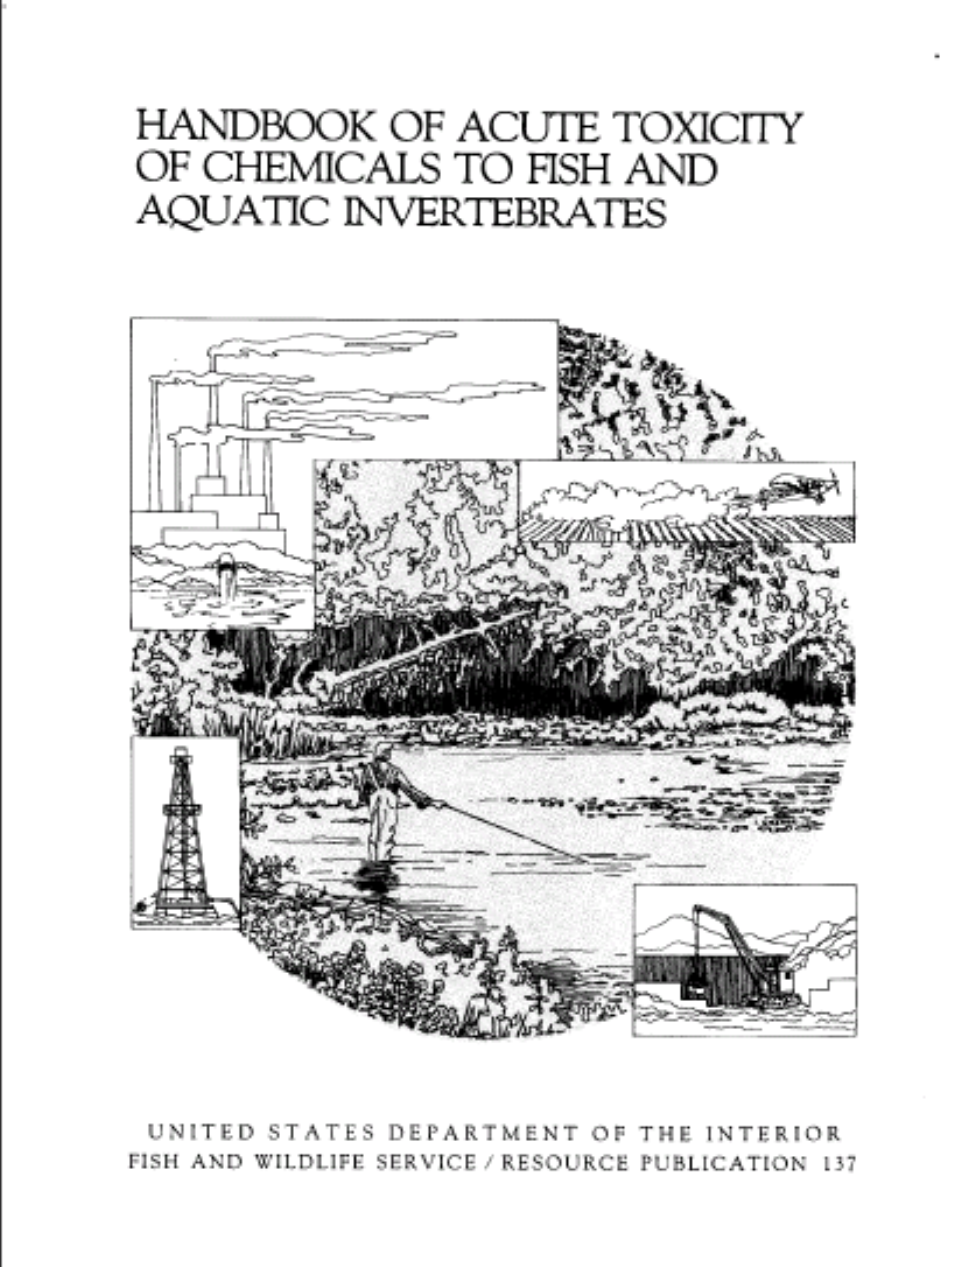 HANDBOOK OF ACUTE TOXICITY OF CHEMICALS TO FISH AND AQUATIC INVERTEBRATES